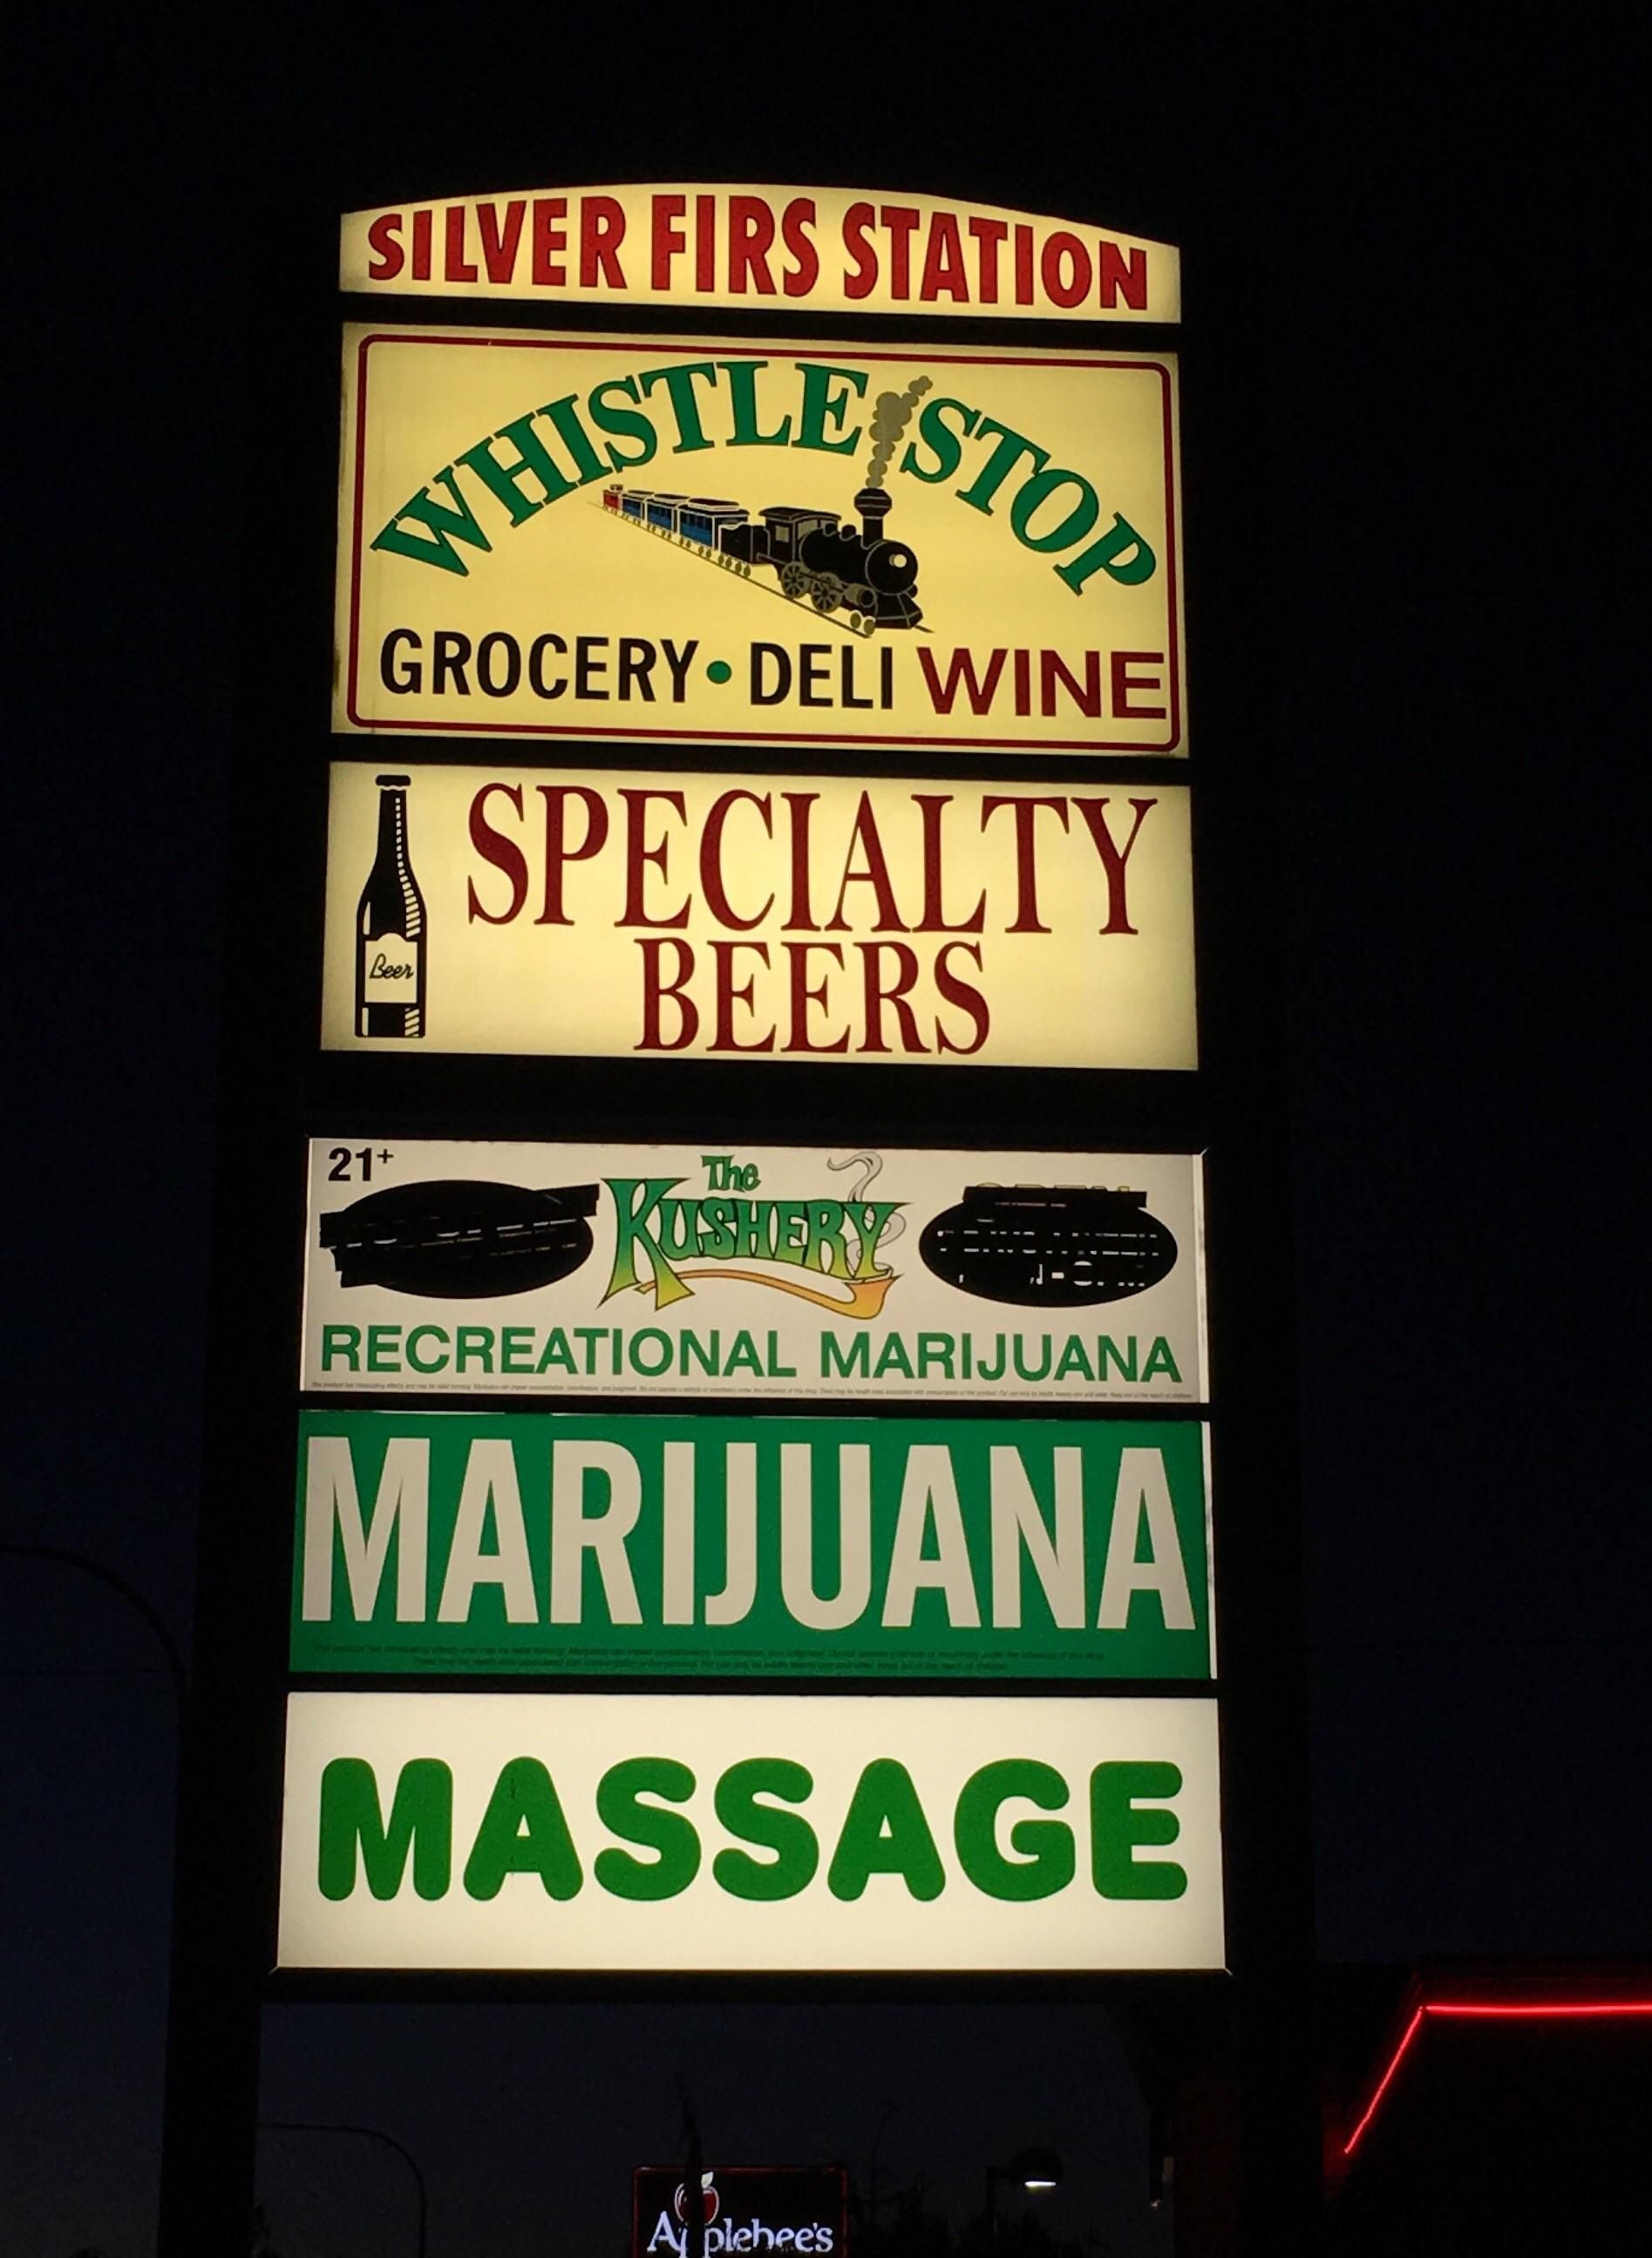 My kind of strip mall. One stop shopping!